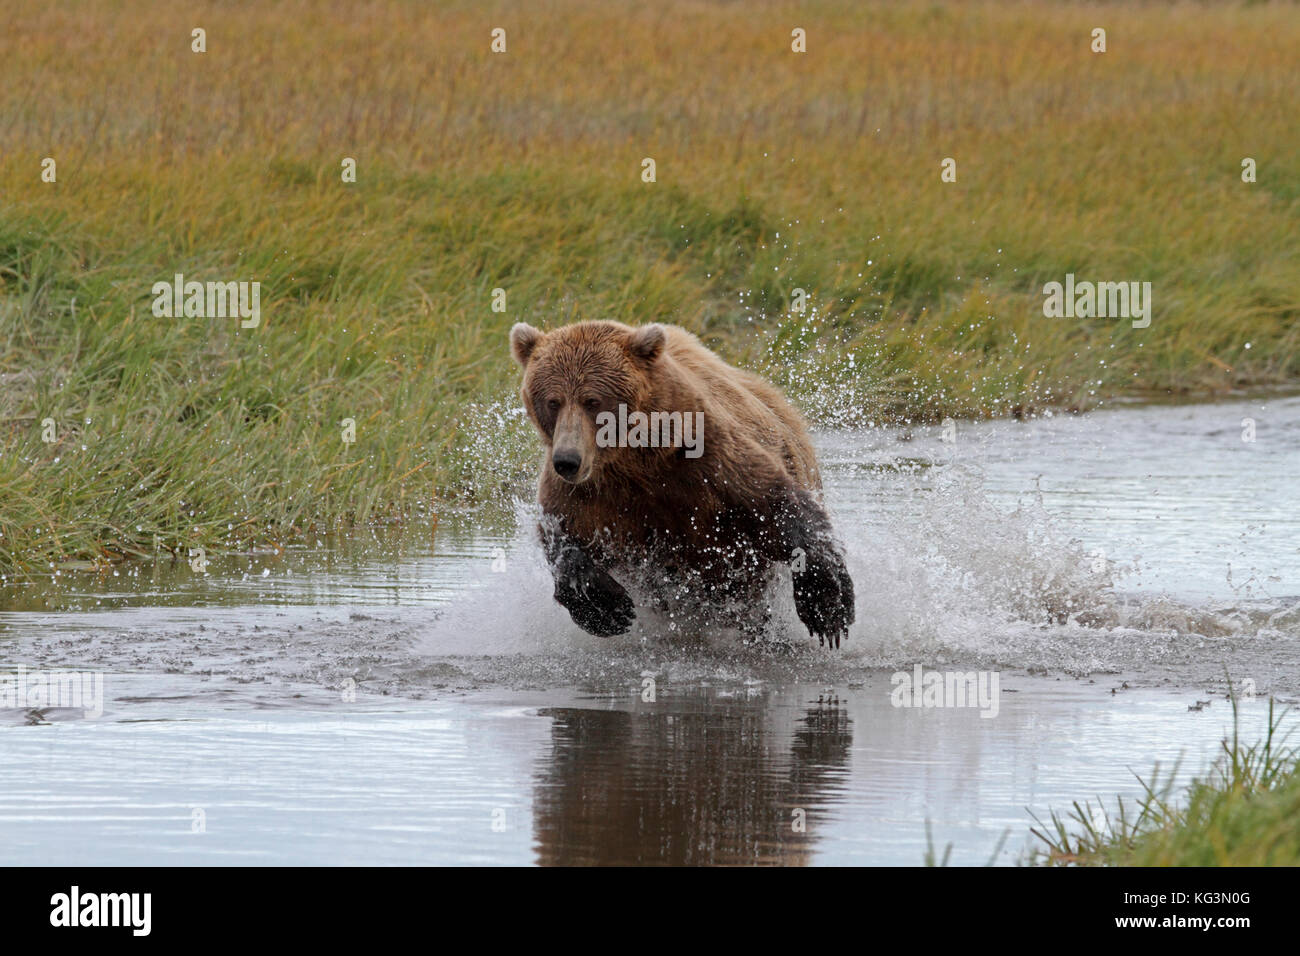 An Alaska brown bear, or grizzly, charges through the water in pursuit of salmon in Katmai National Park in Alaska. Stock Photo